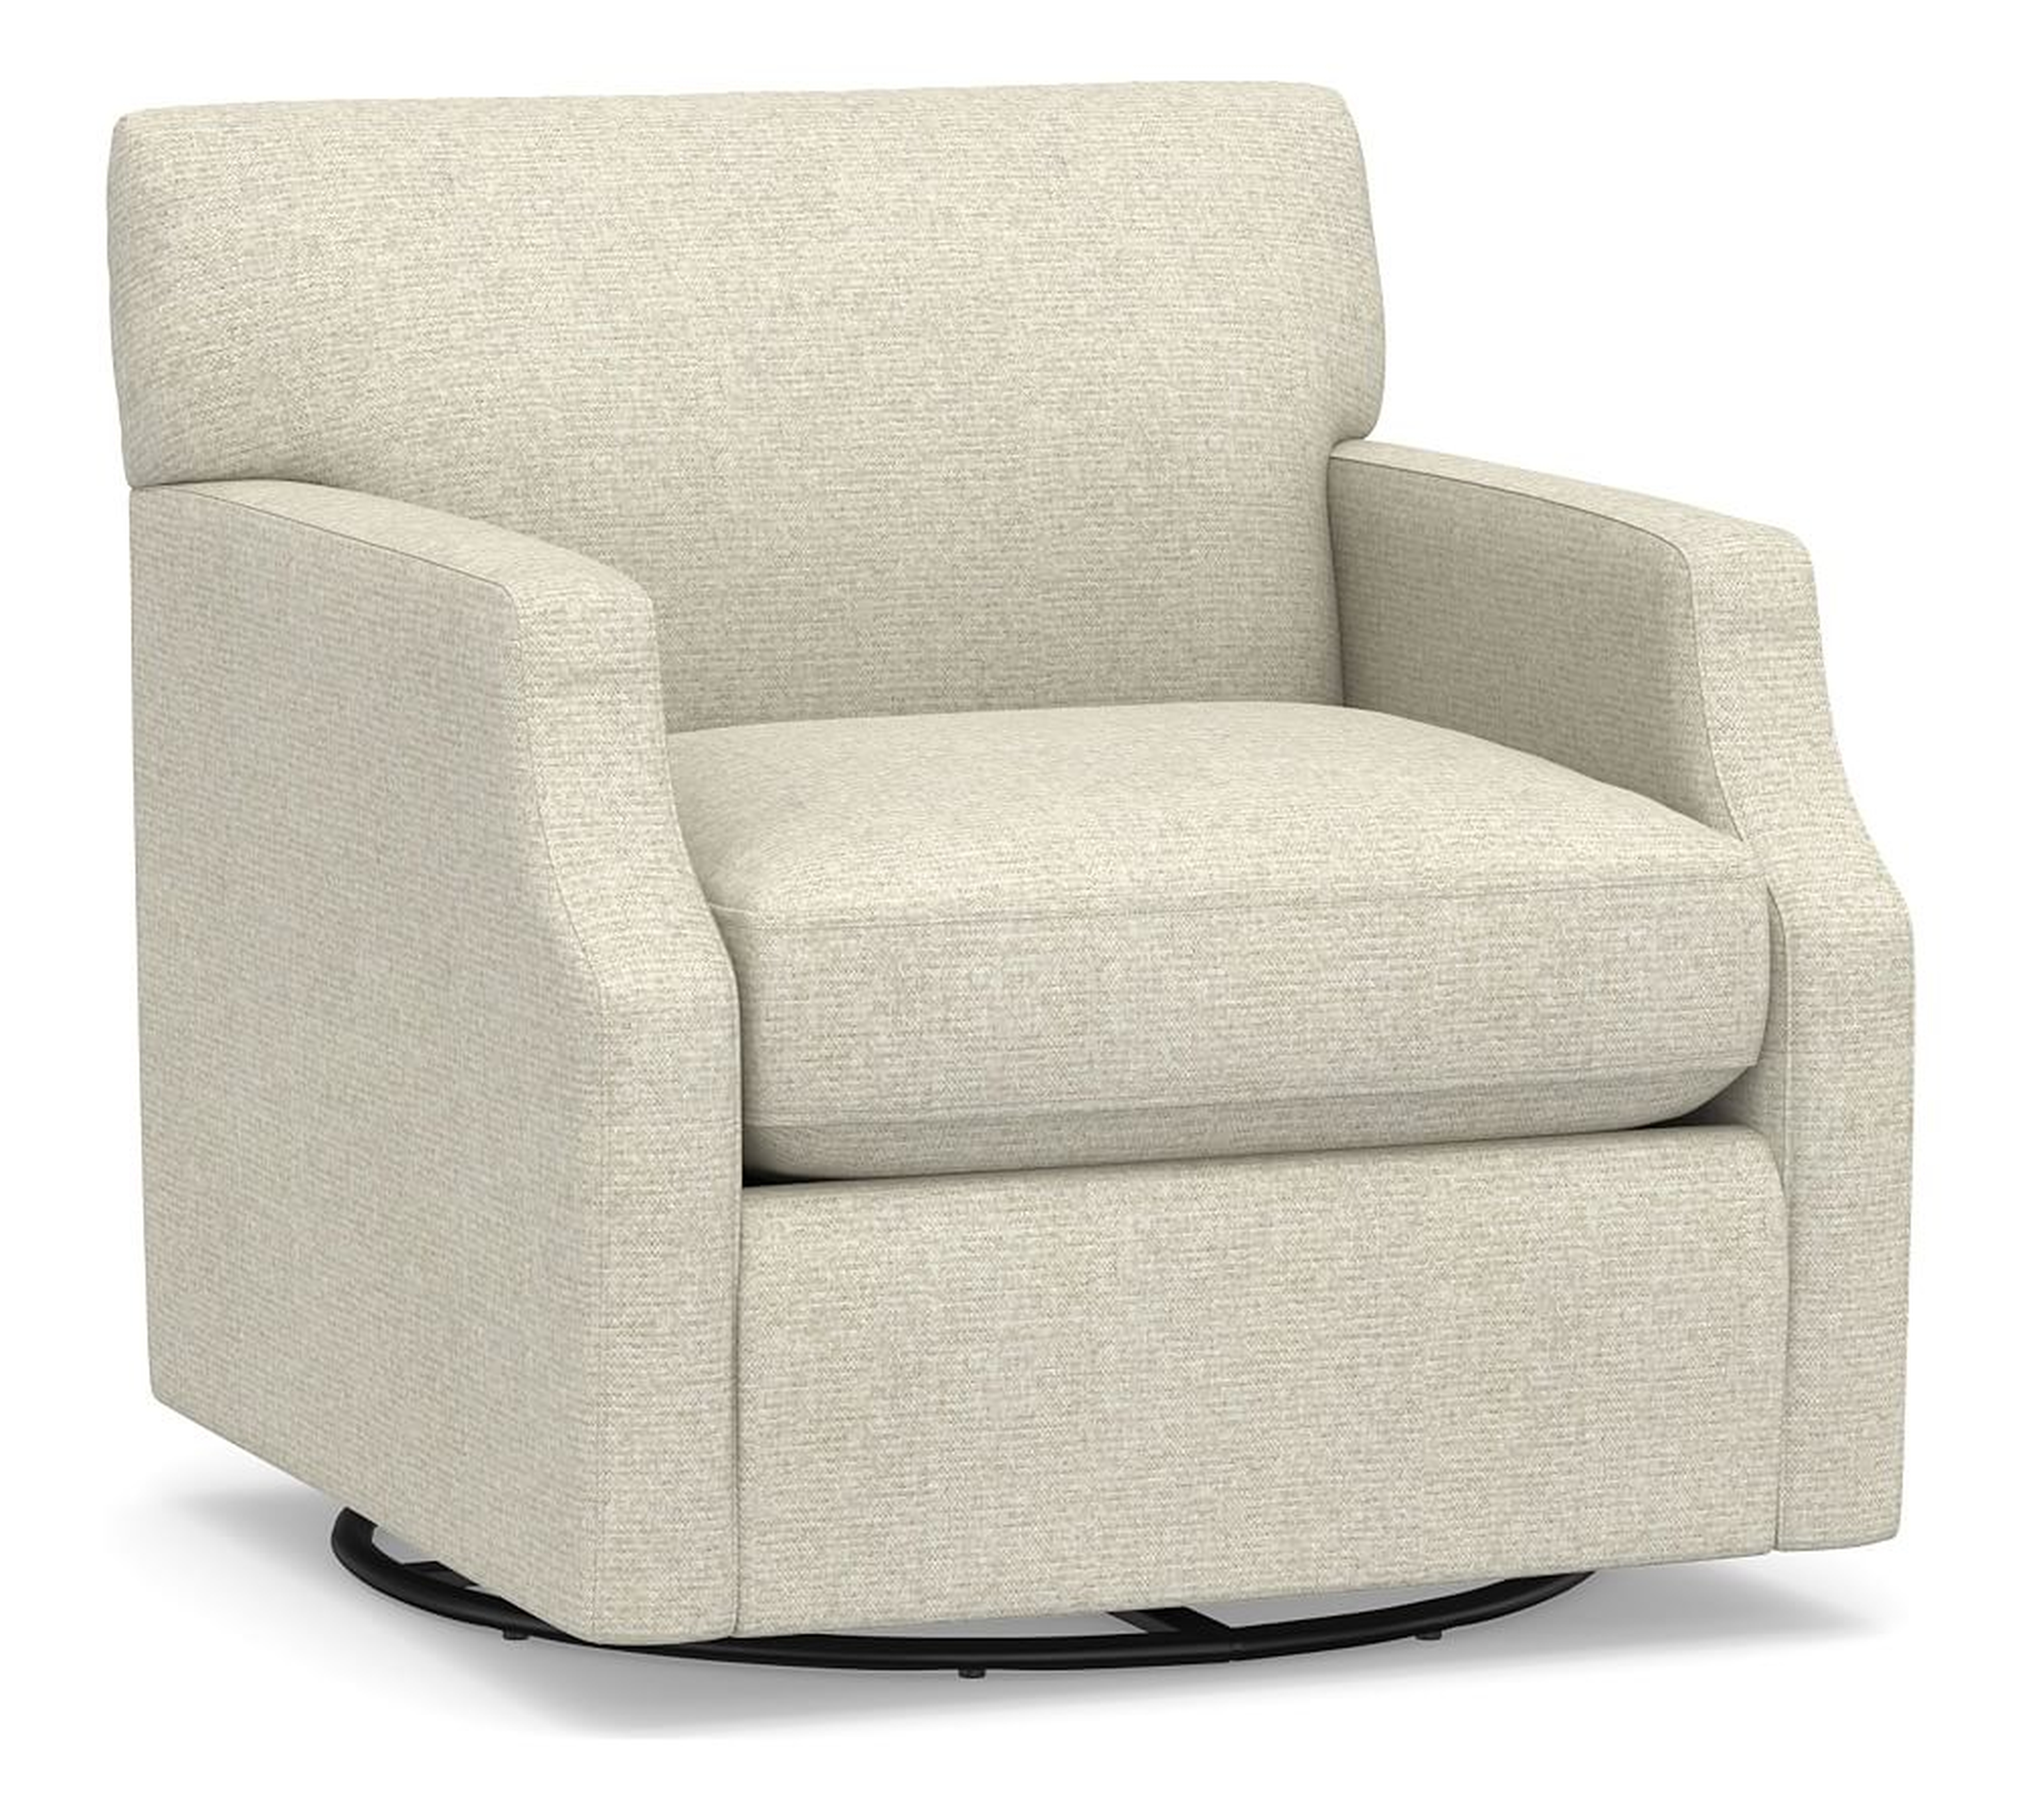 SoMa Hazel Upholstered Swivel Armchair, Polyester Wrapped Cushions, Performance Heathered Basketweave Alabaster White - Pottery Barn